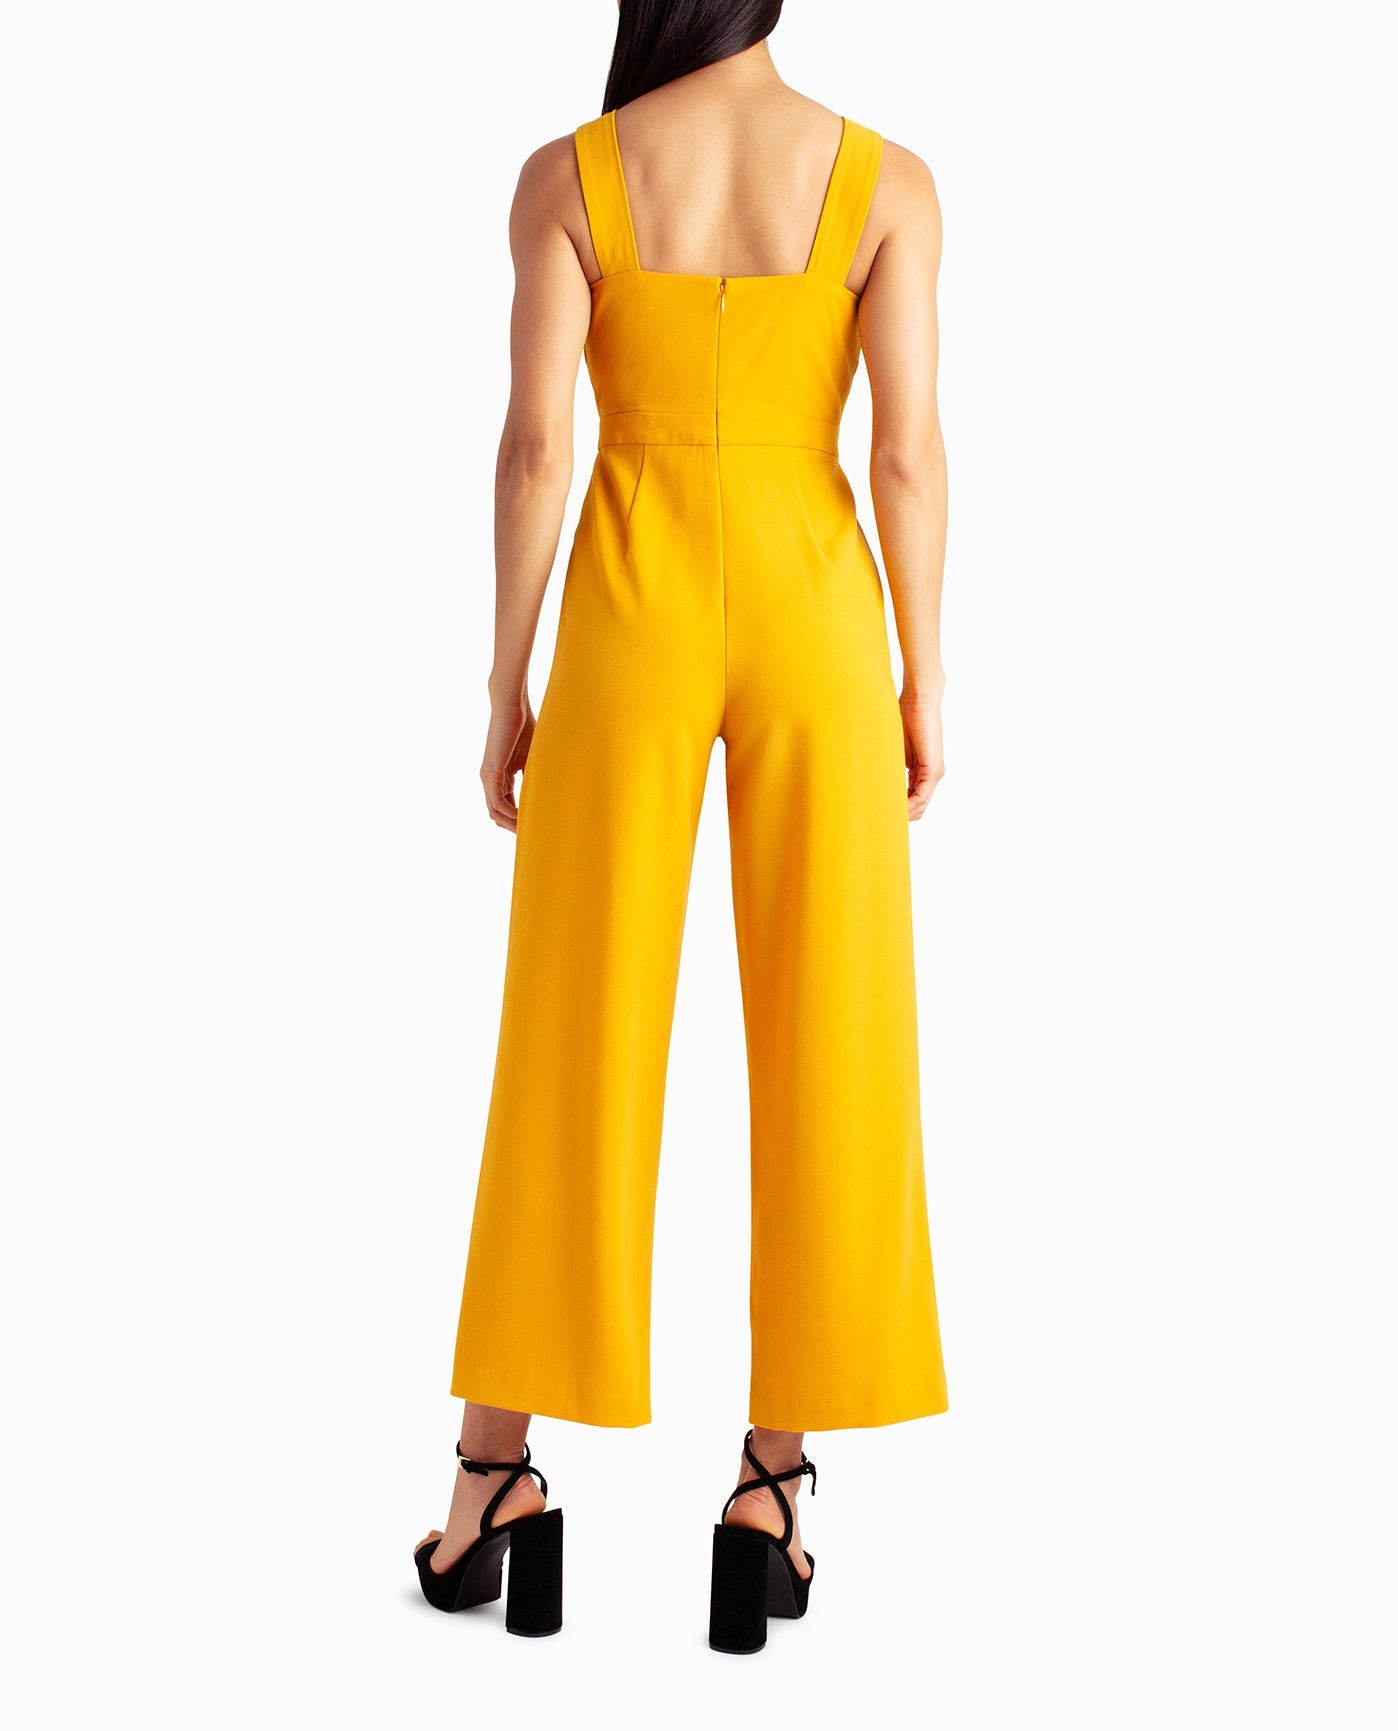 Havoc - yellow spandex jumpsuit with black panels and arrow